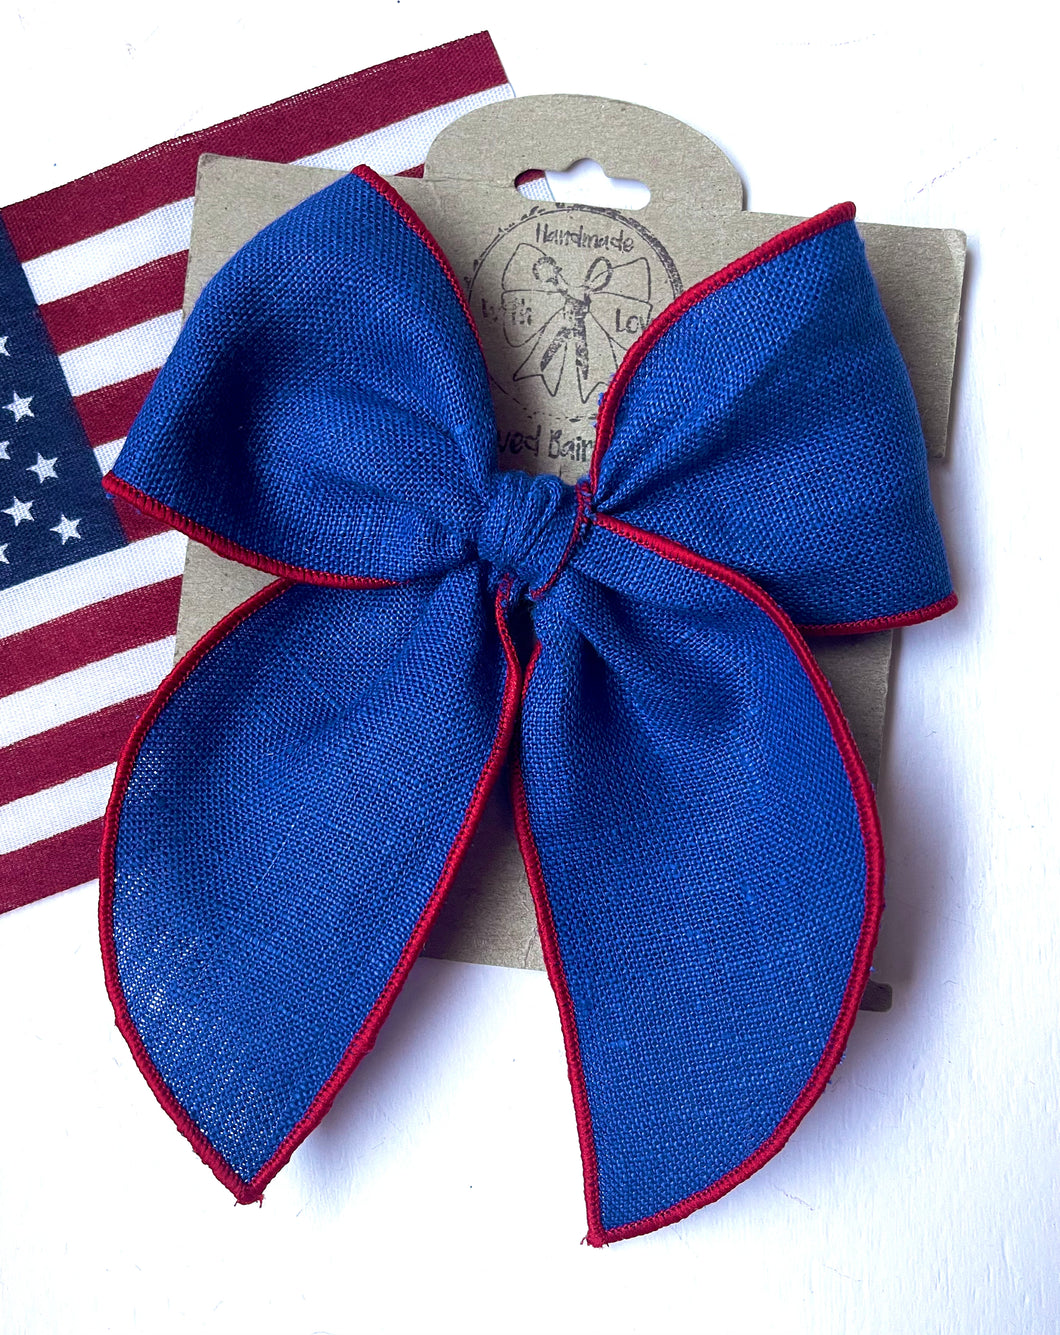 American Made Beloved Bows and Headbands